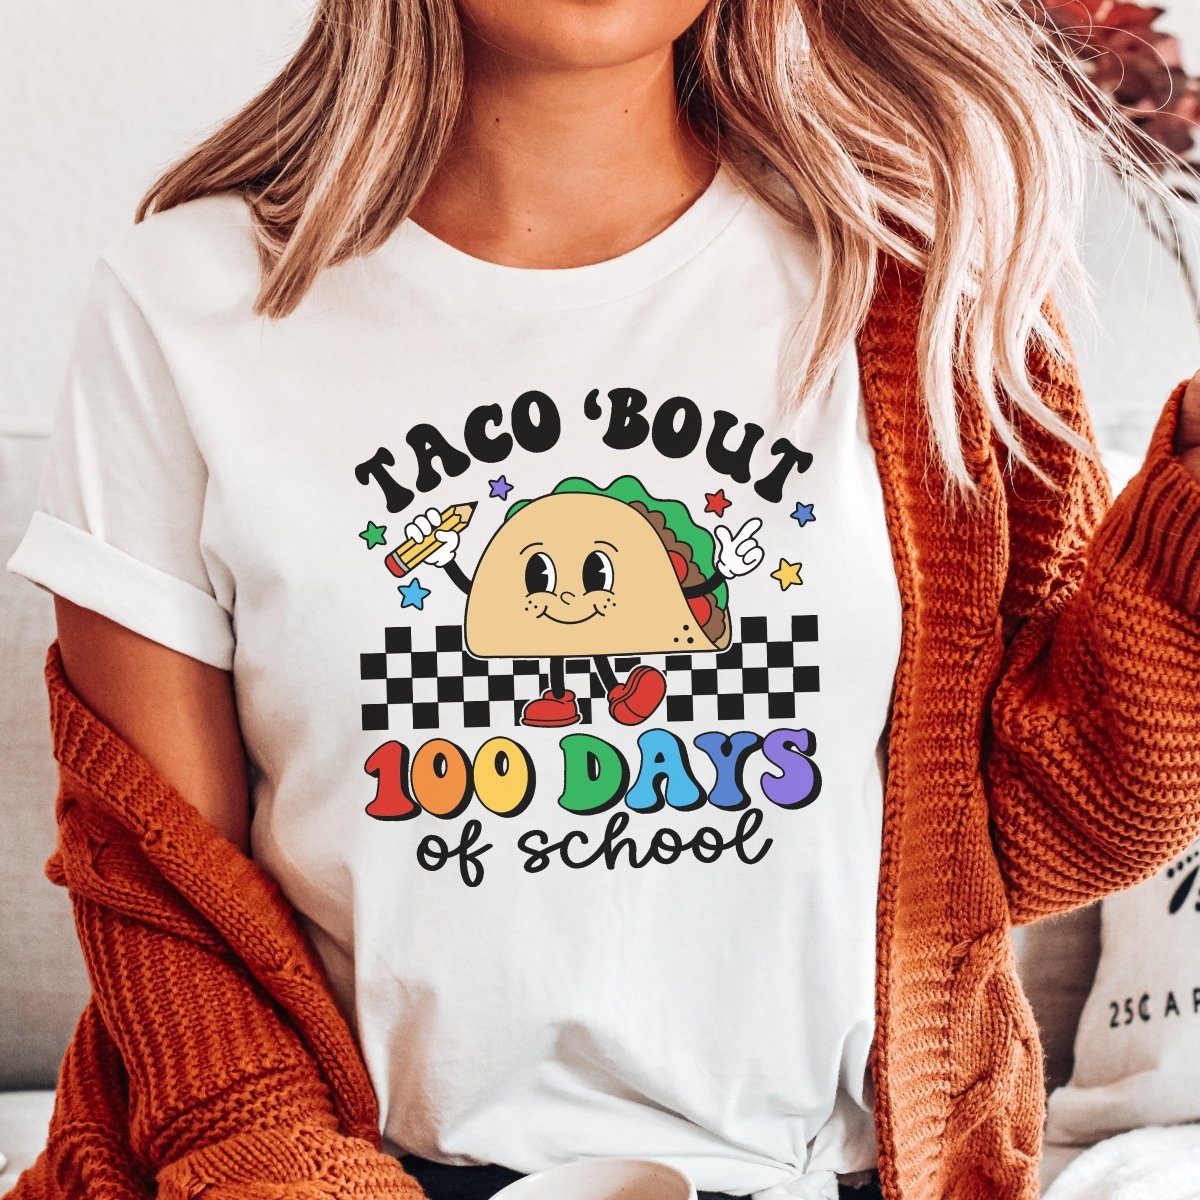 Taco Bout 100 Days Of School Tee - Limeberry Designs